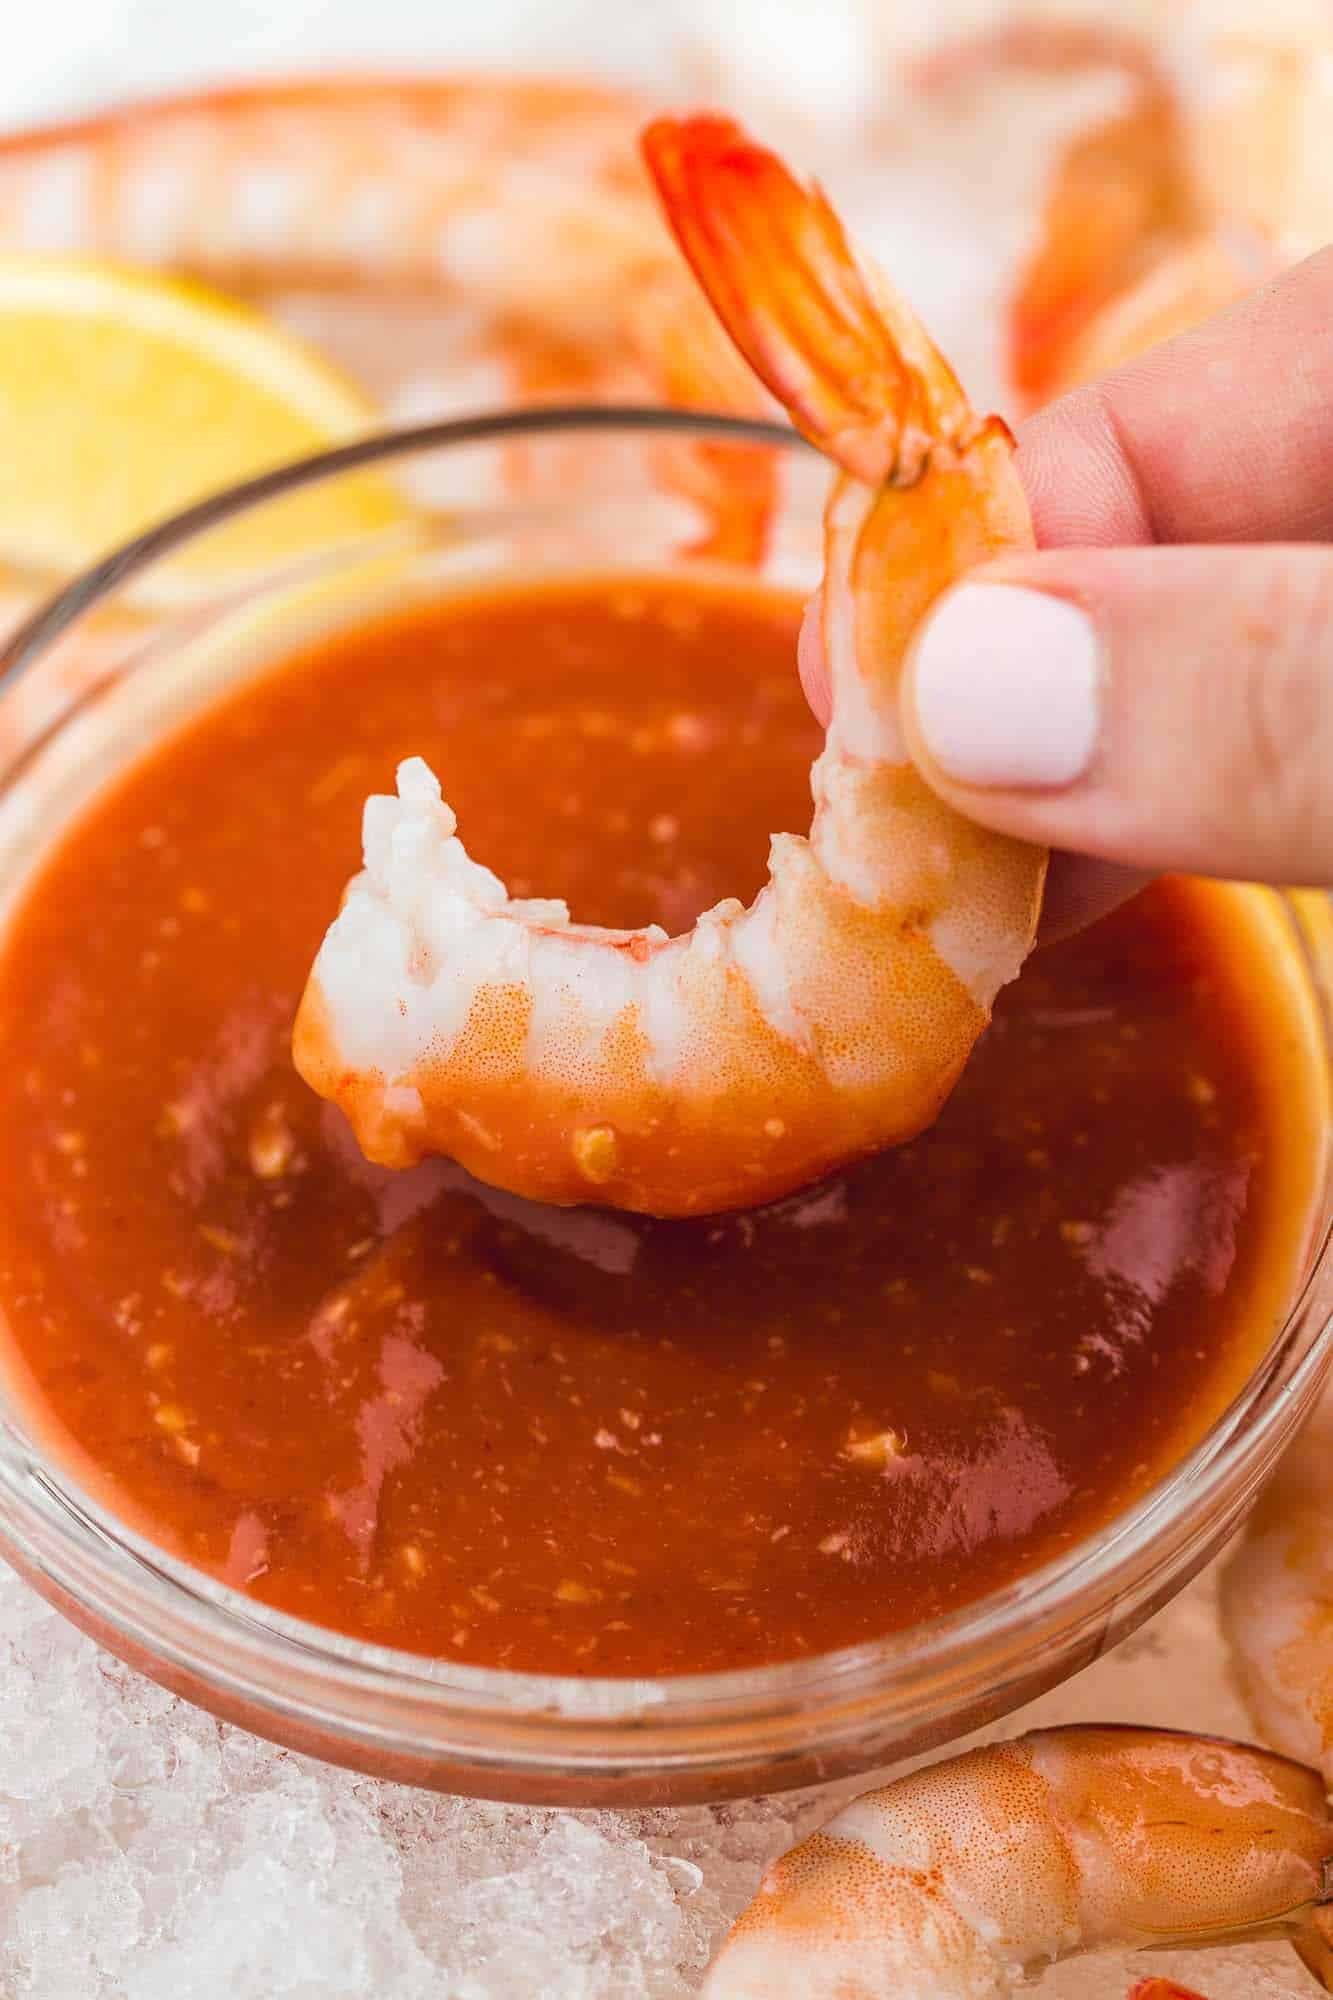 Dipping a cooked jumbo shrimp in cocktail sauce that's served in a small glass bowl